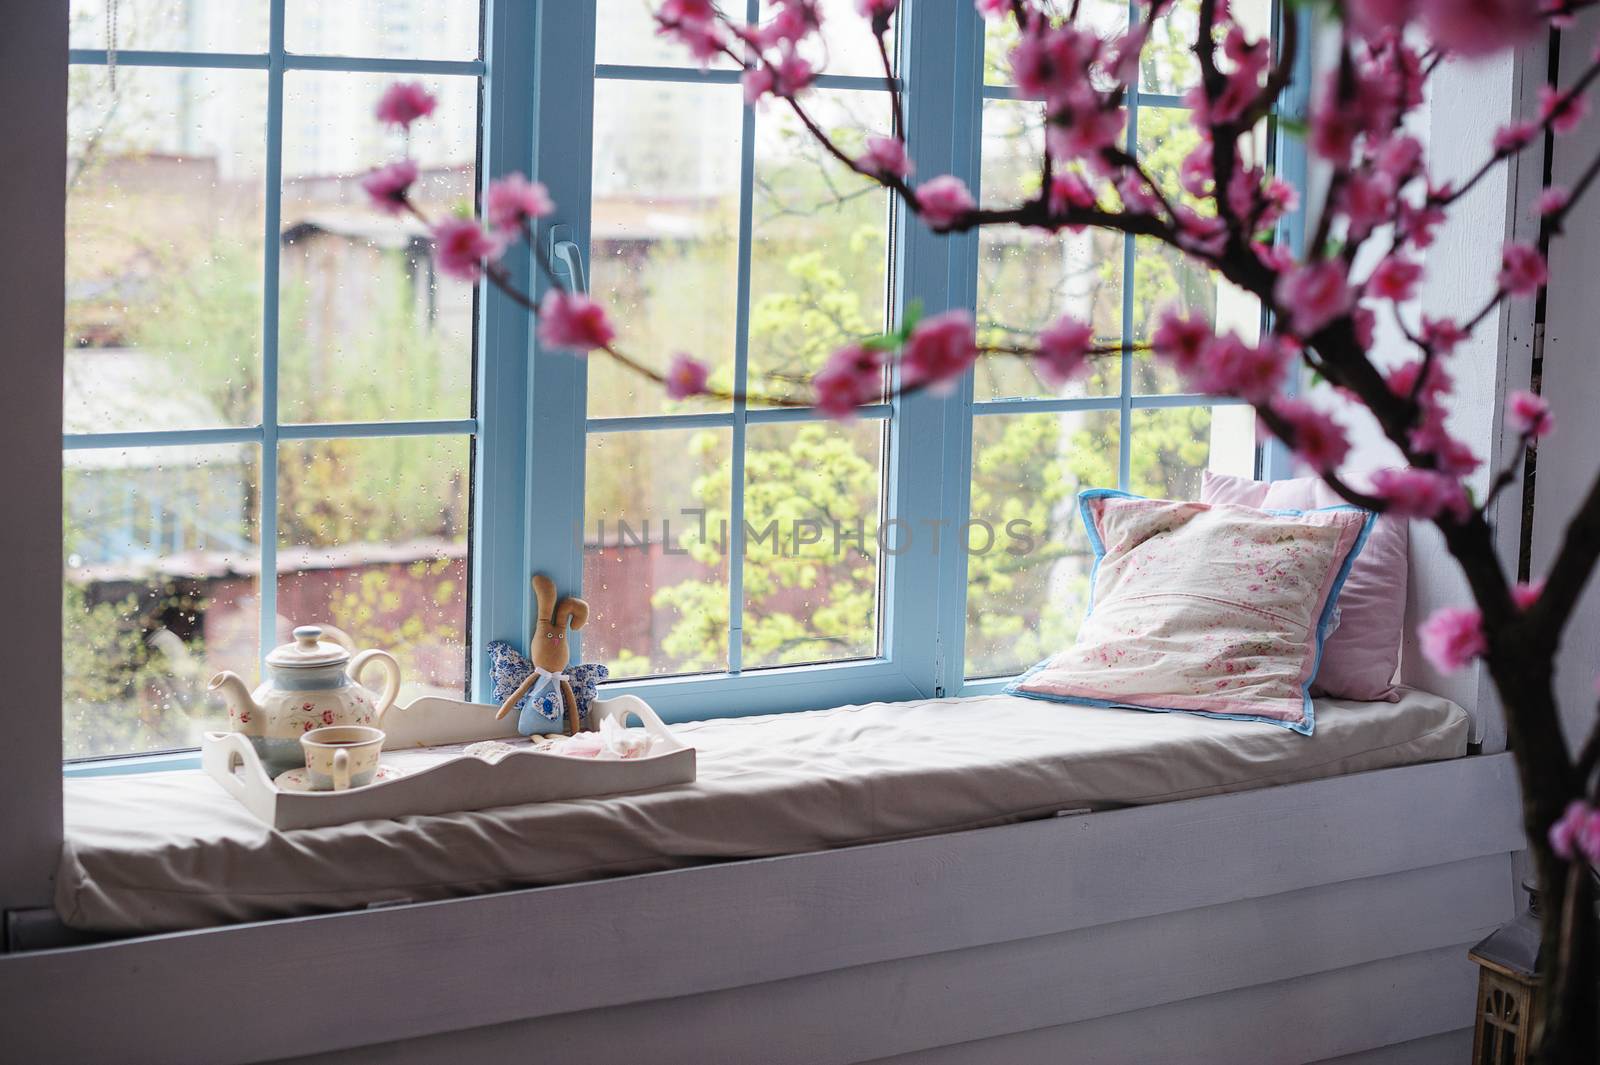 salver with tea and pillows on the window sill and a branch of apple blossoms in the foreground